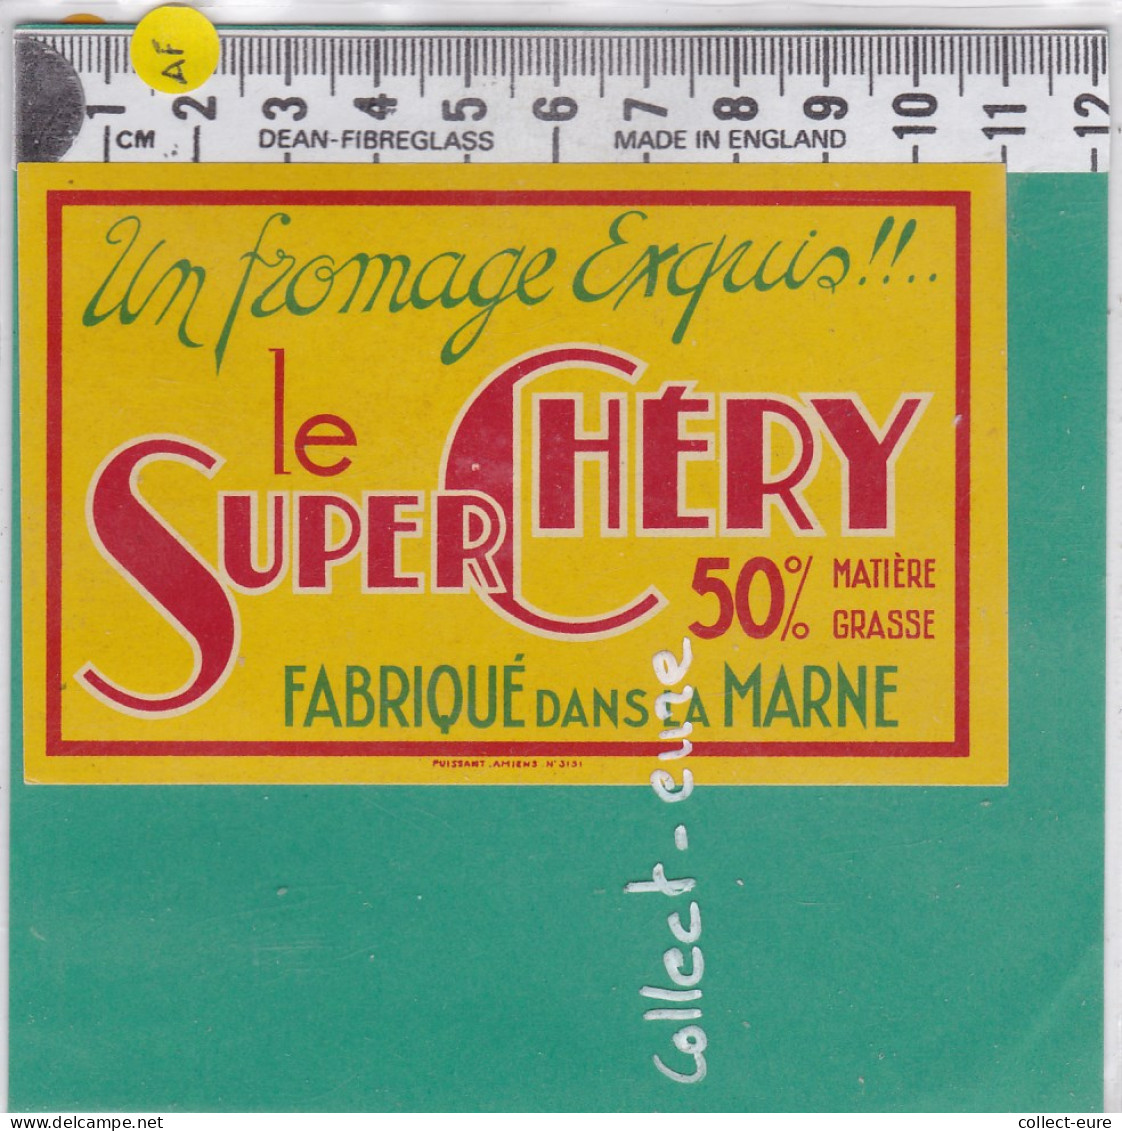 C1224 FROMAGE EXQUIS LE SUPER CHERY MARNE 50 % - Formaggio